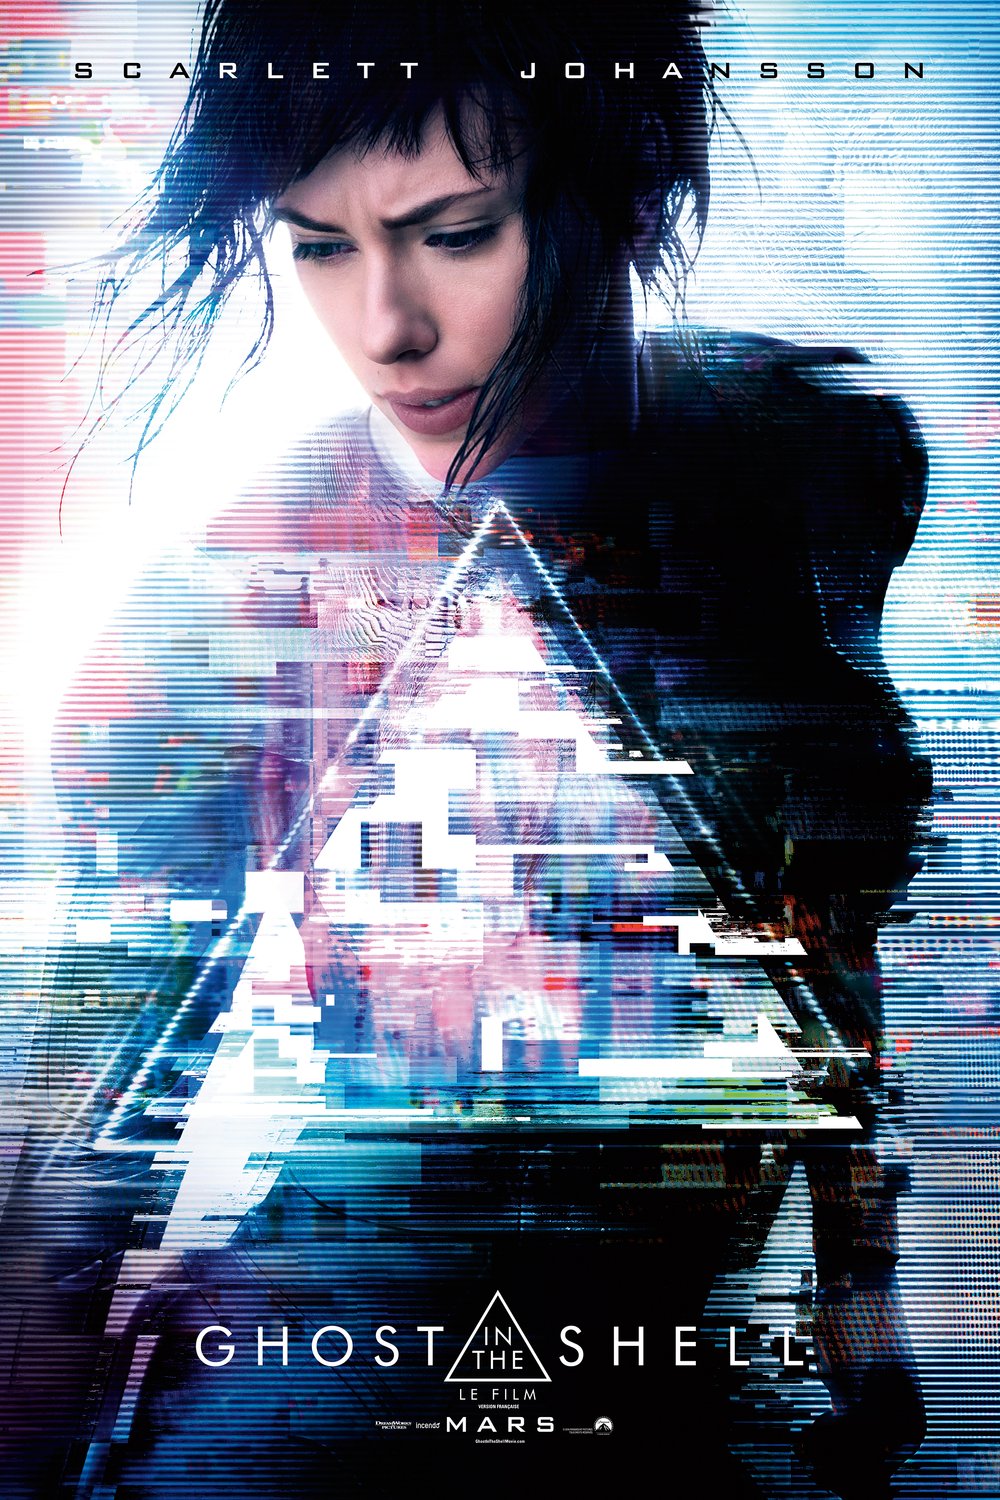 L'affiche du film Ghost in the Shell: Le film